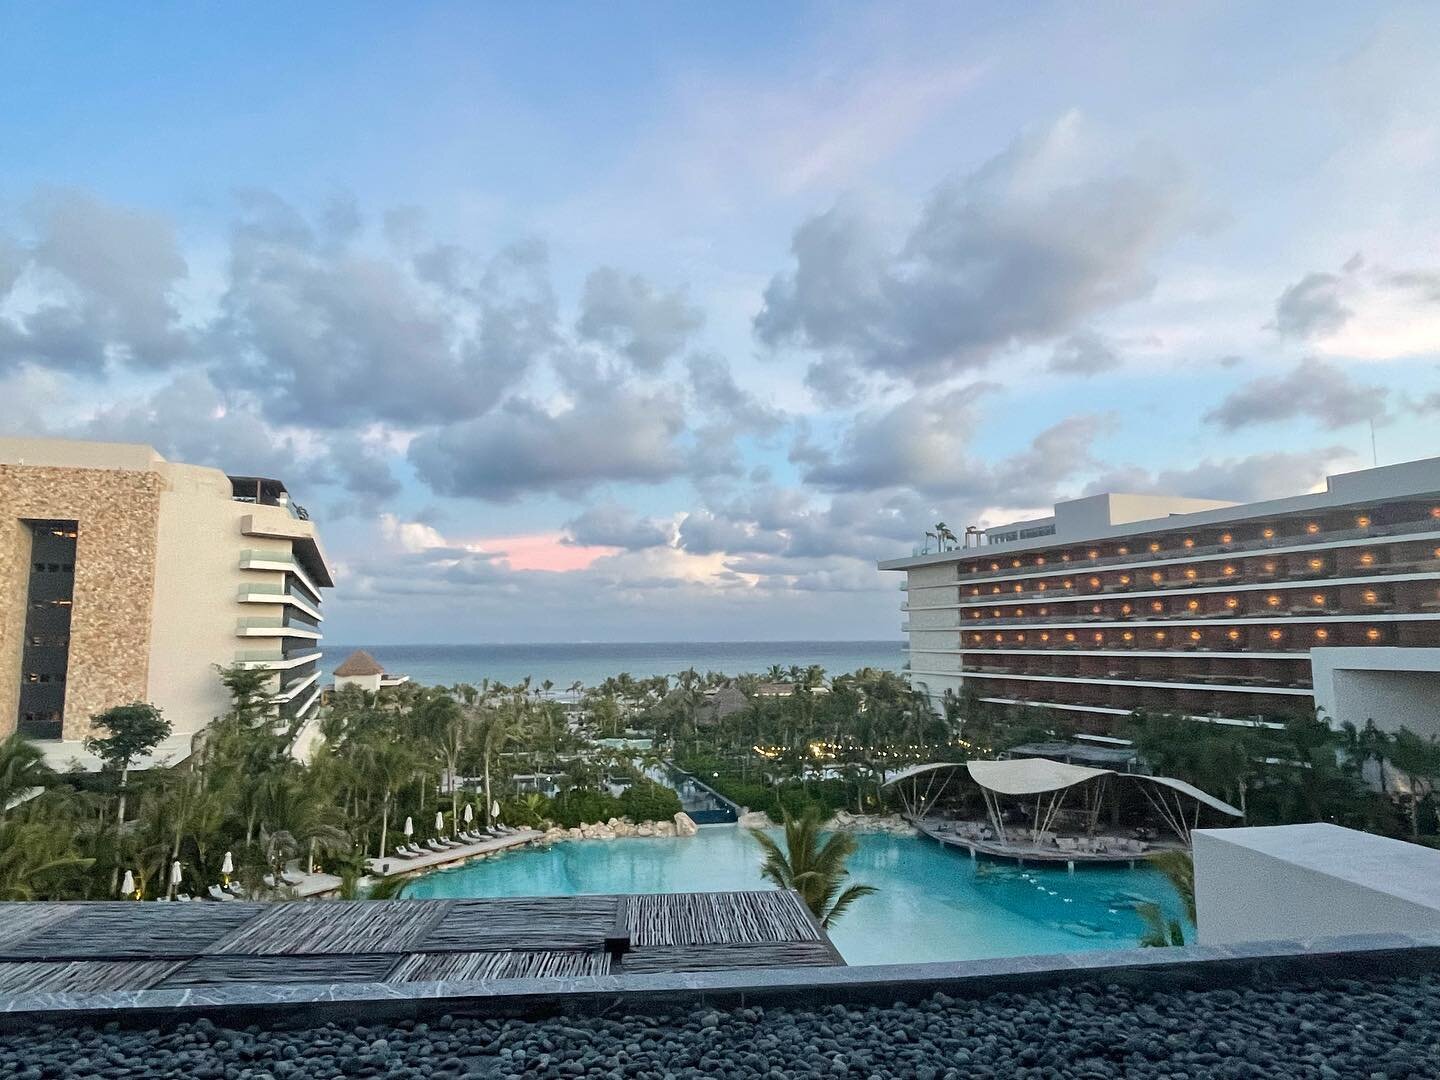 A review of the facilities &amp; grounds at Secrets Moxche: 

Secrets Moxche is in Playa del Carmen, about 45 minutes from the Cancun airport. This resort is stunning and I love all the greenery and natural landscapes&mdash;impressive growth for a re